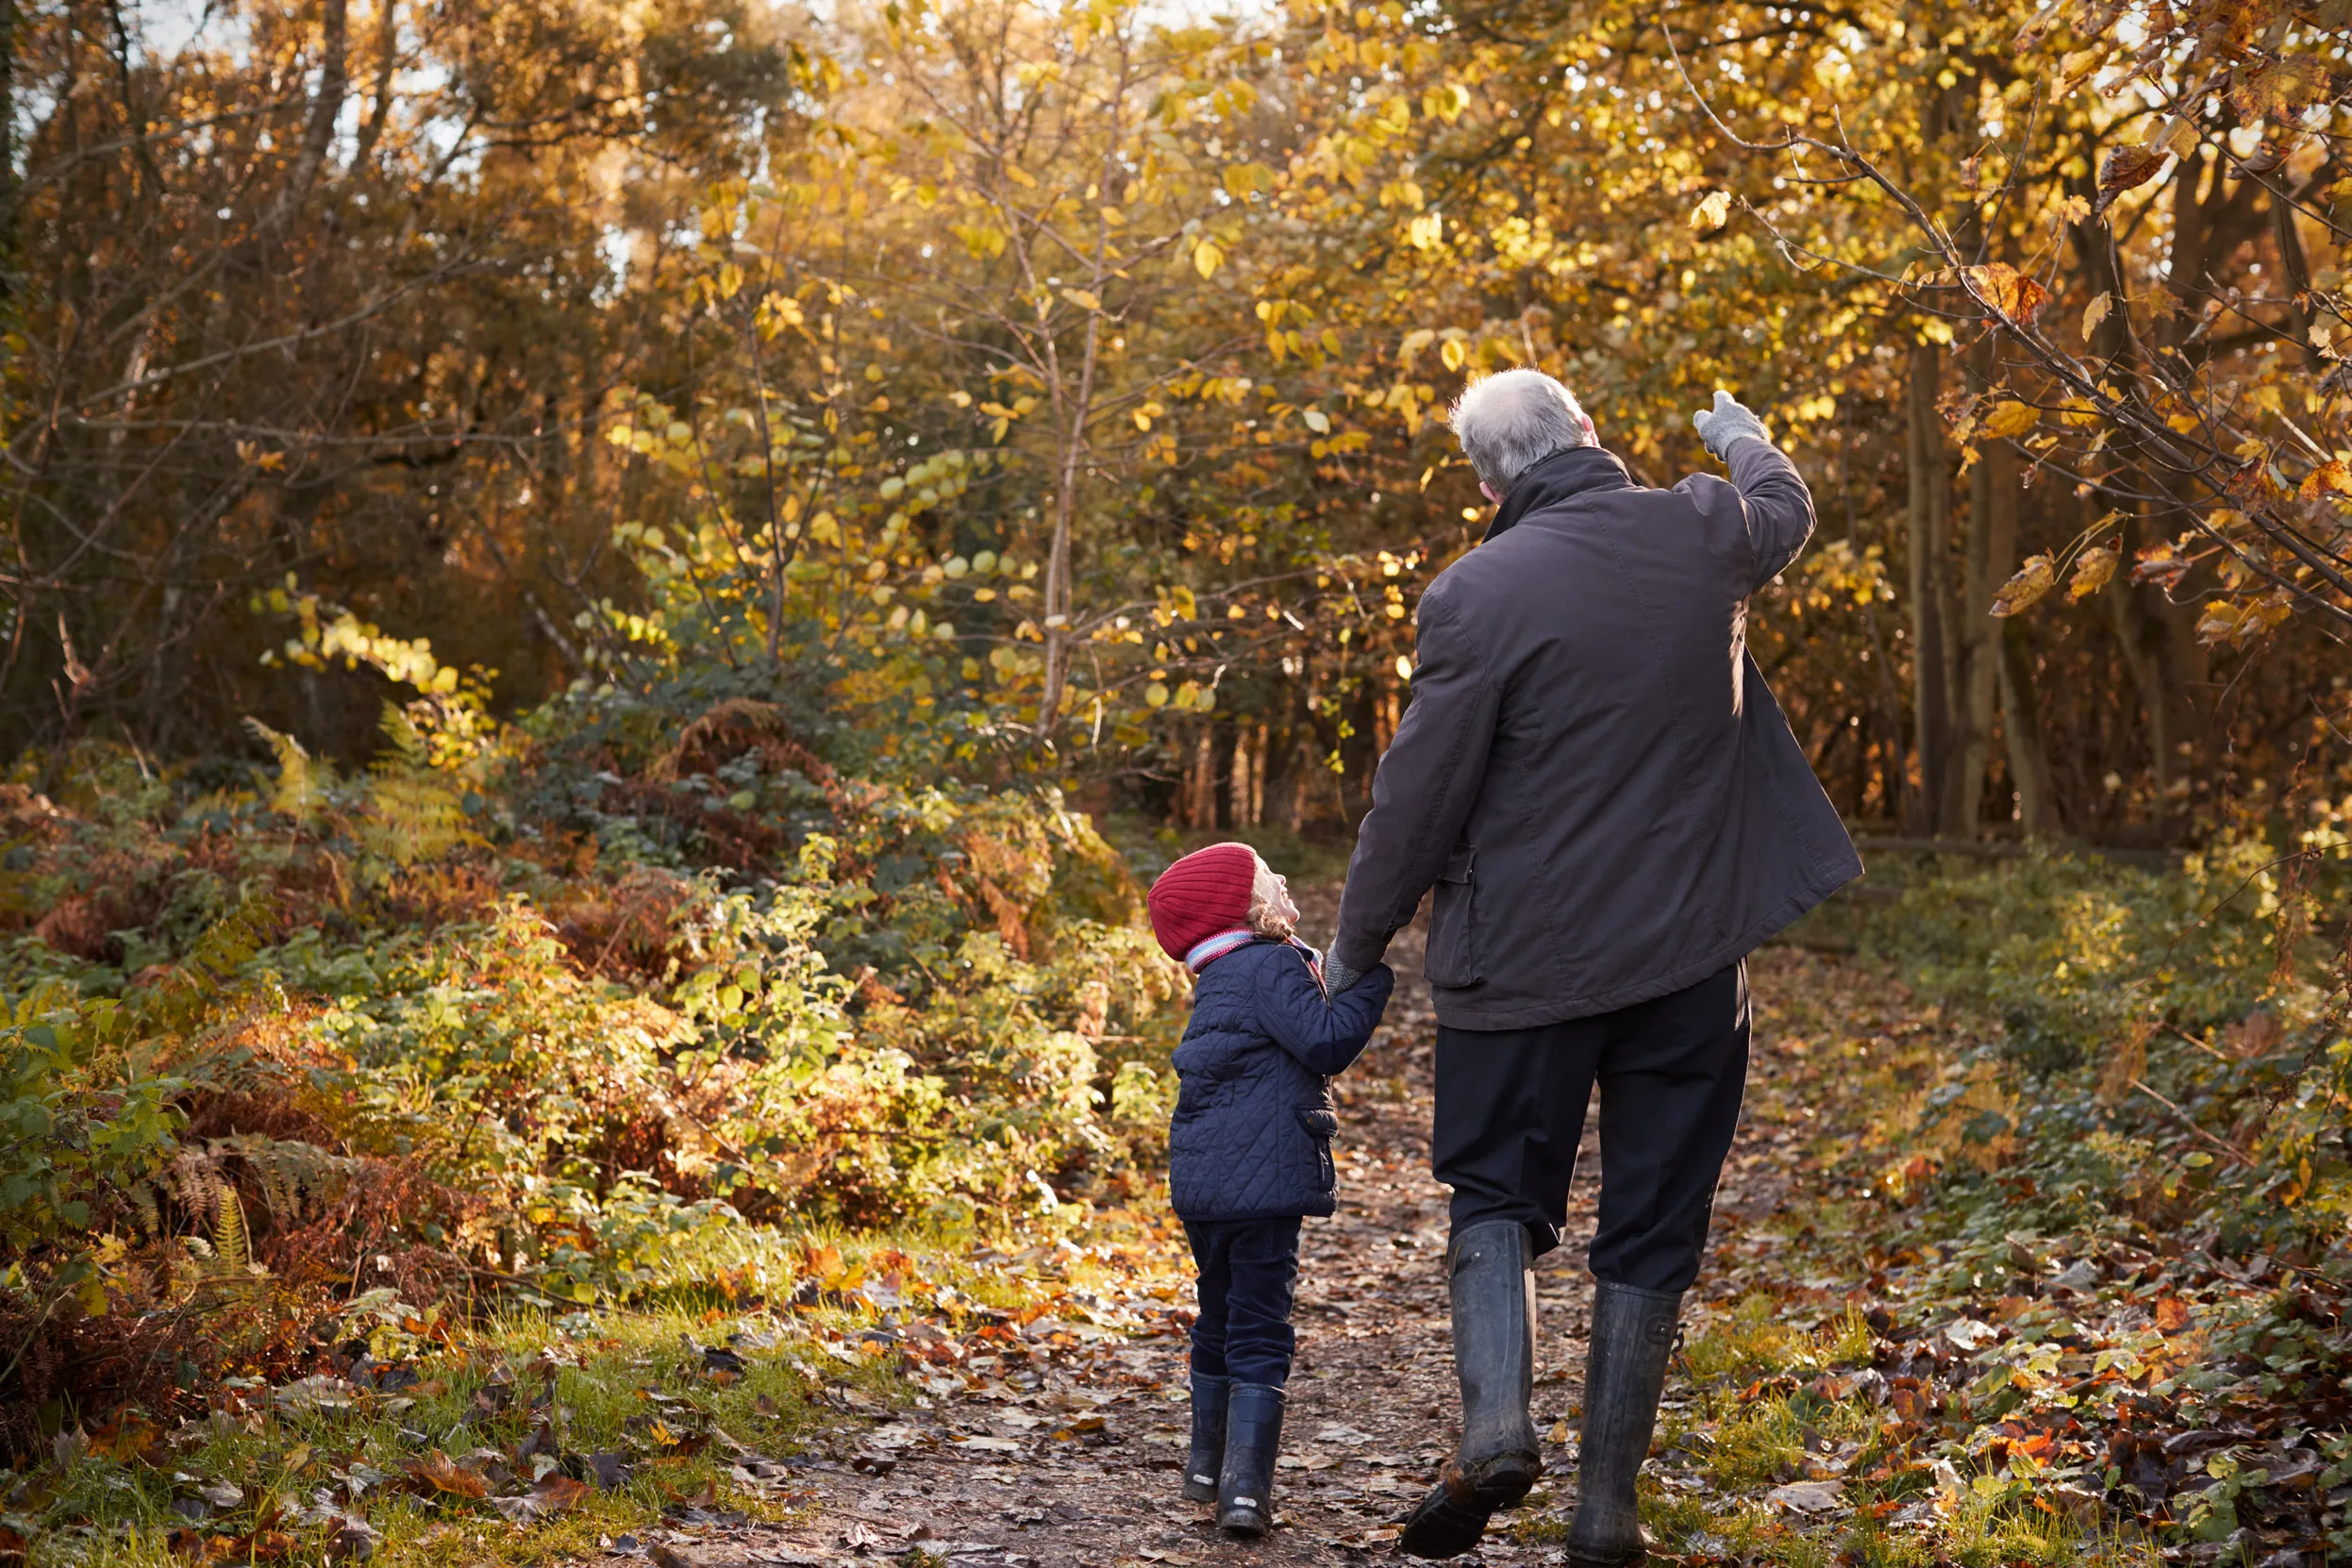 A grandparents and child taking a walk through the woods wearing winter coats.